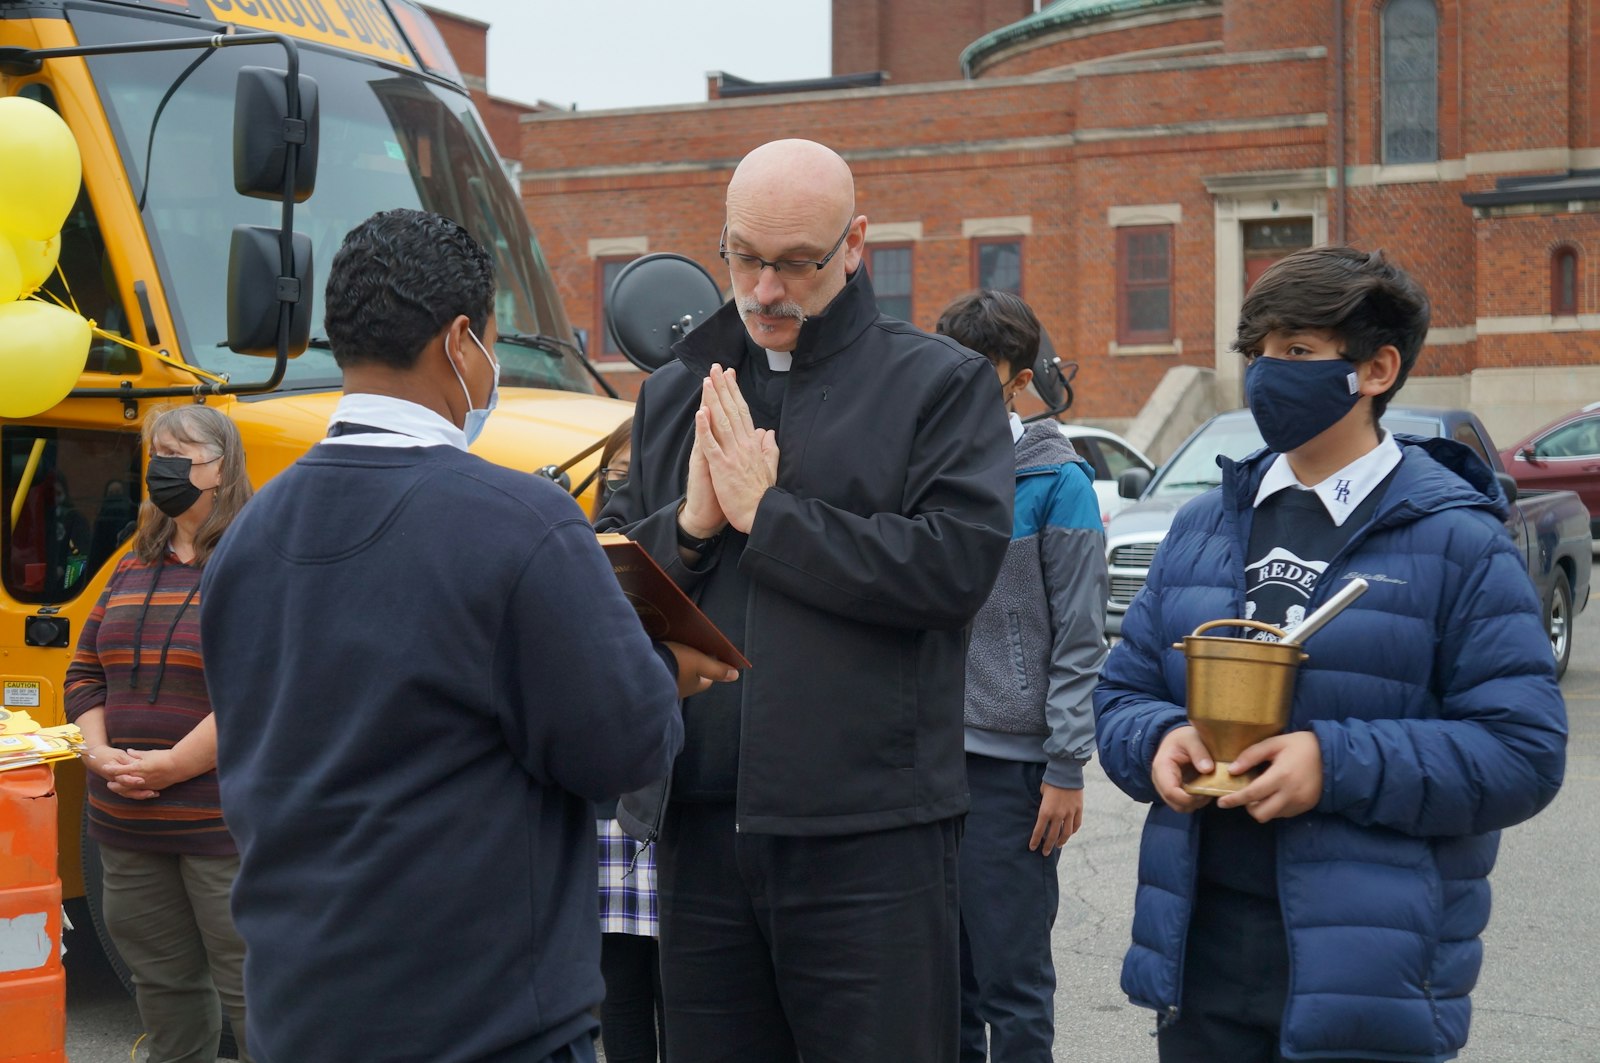 Fr. Dennis Walsh, SOLT, pastor of Holy Redeemer Parish, blesses the new school bus as Holy Redeemer students look on.